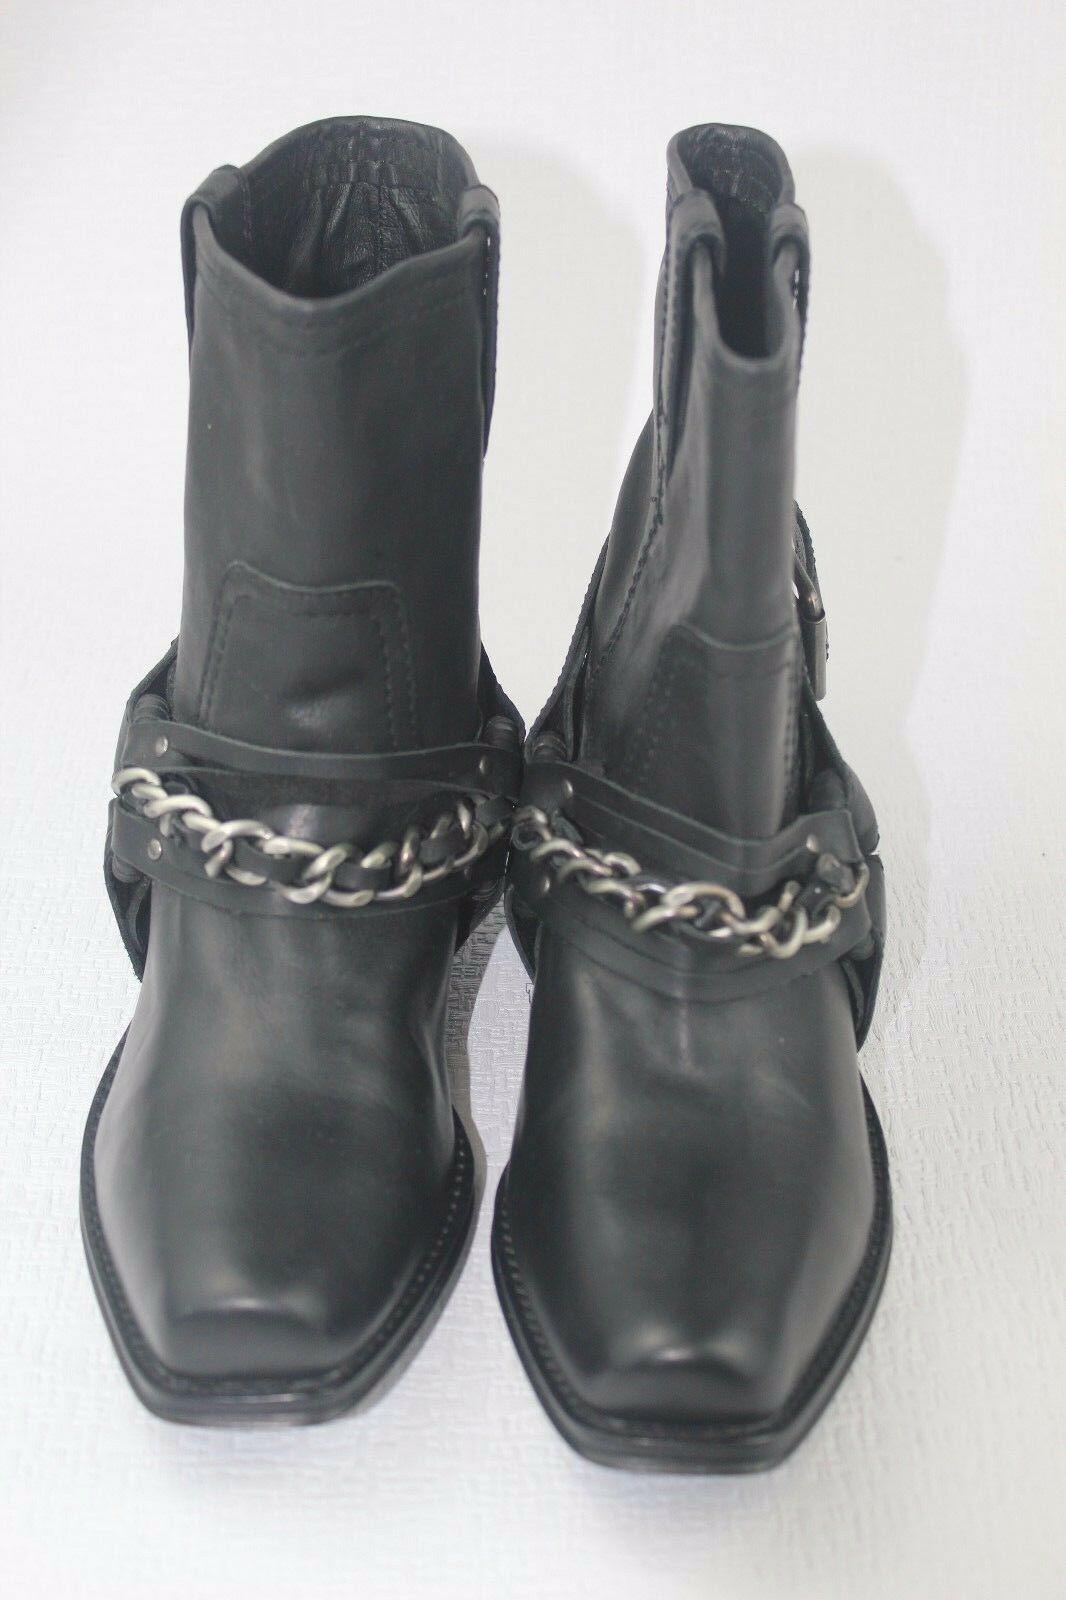 Juicy Couture  Darby Chain-Harness Boot Size 7.5 - SVNYFancy